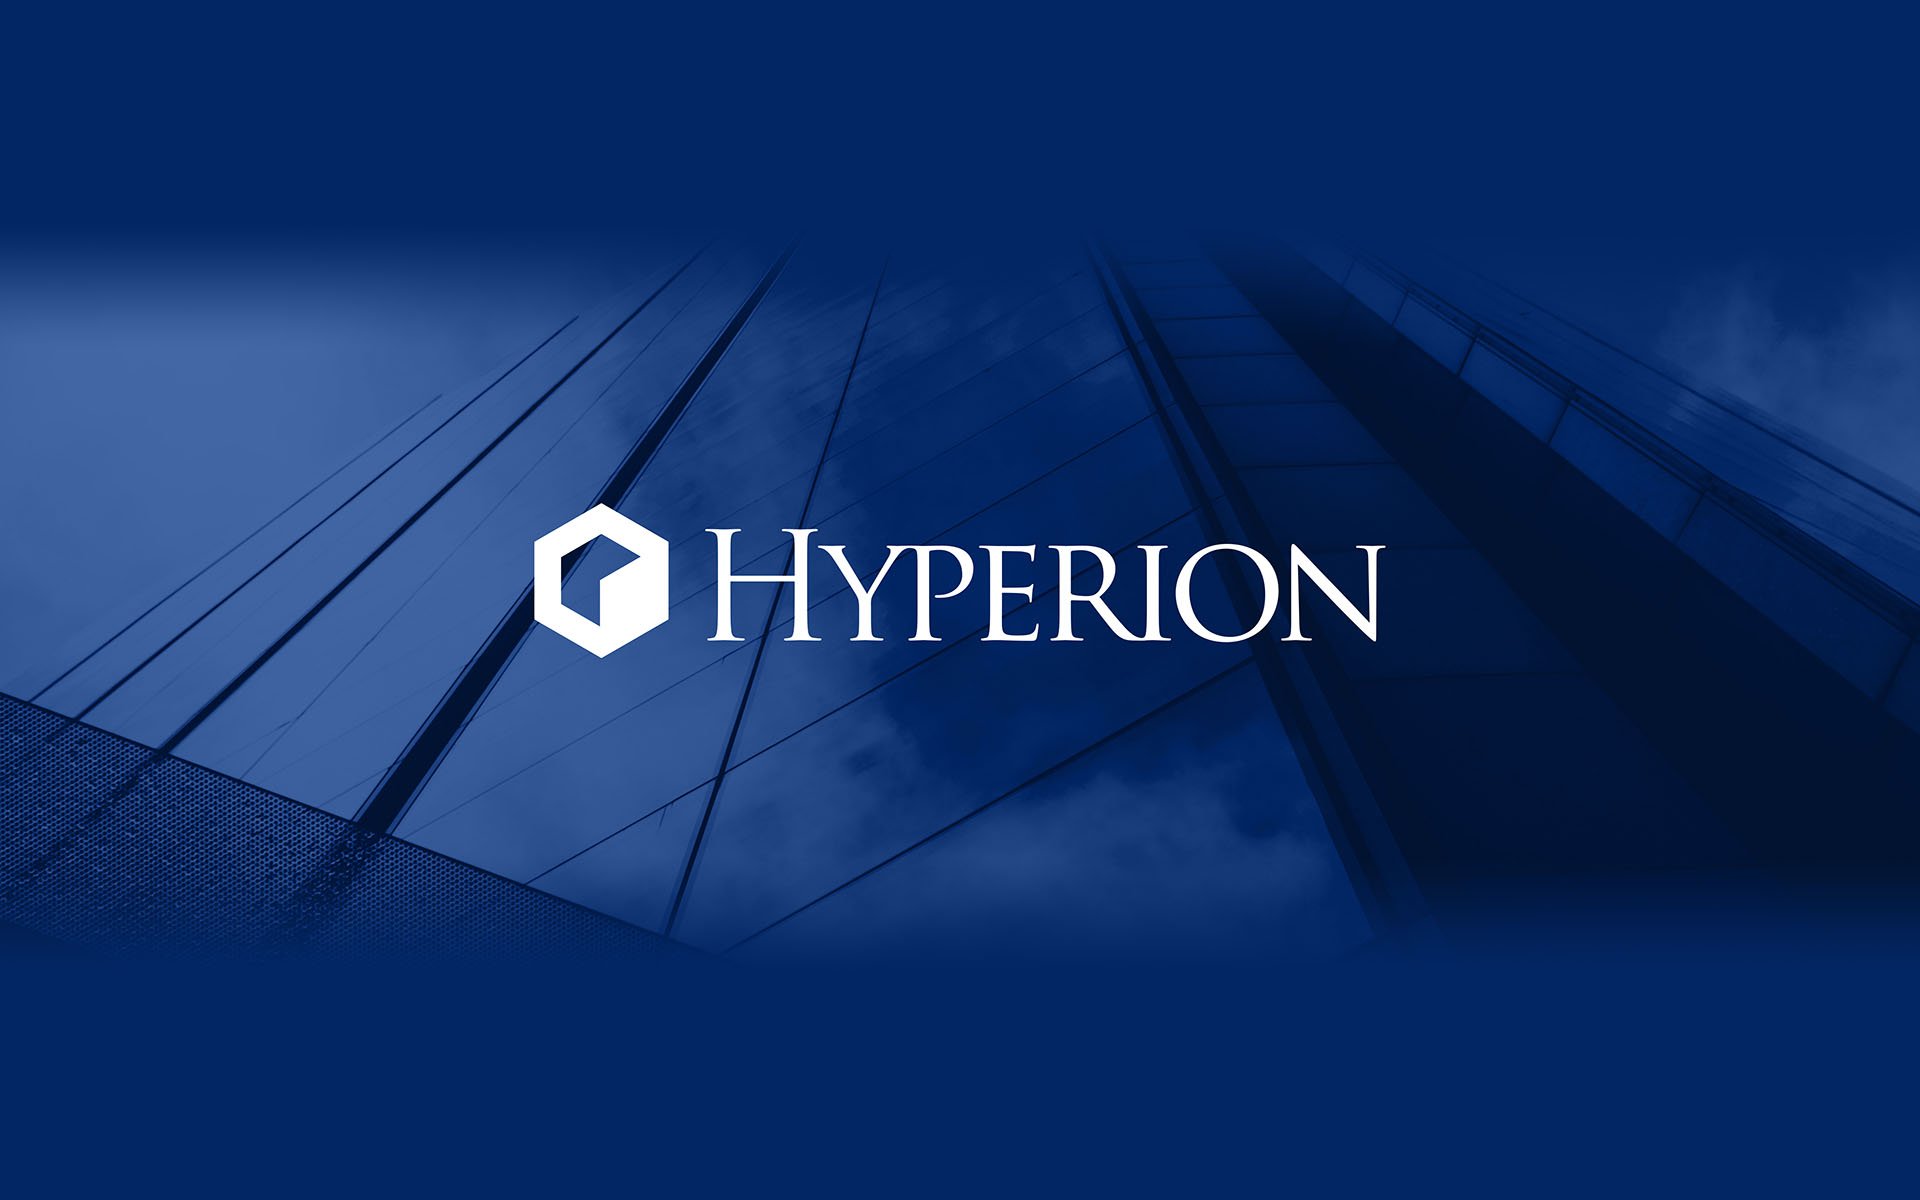 ICO Investing Established as the New Authority in 2018 - Hyperion Fund Poised to Capture Further Growth